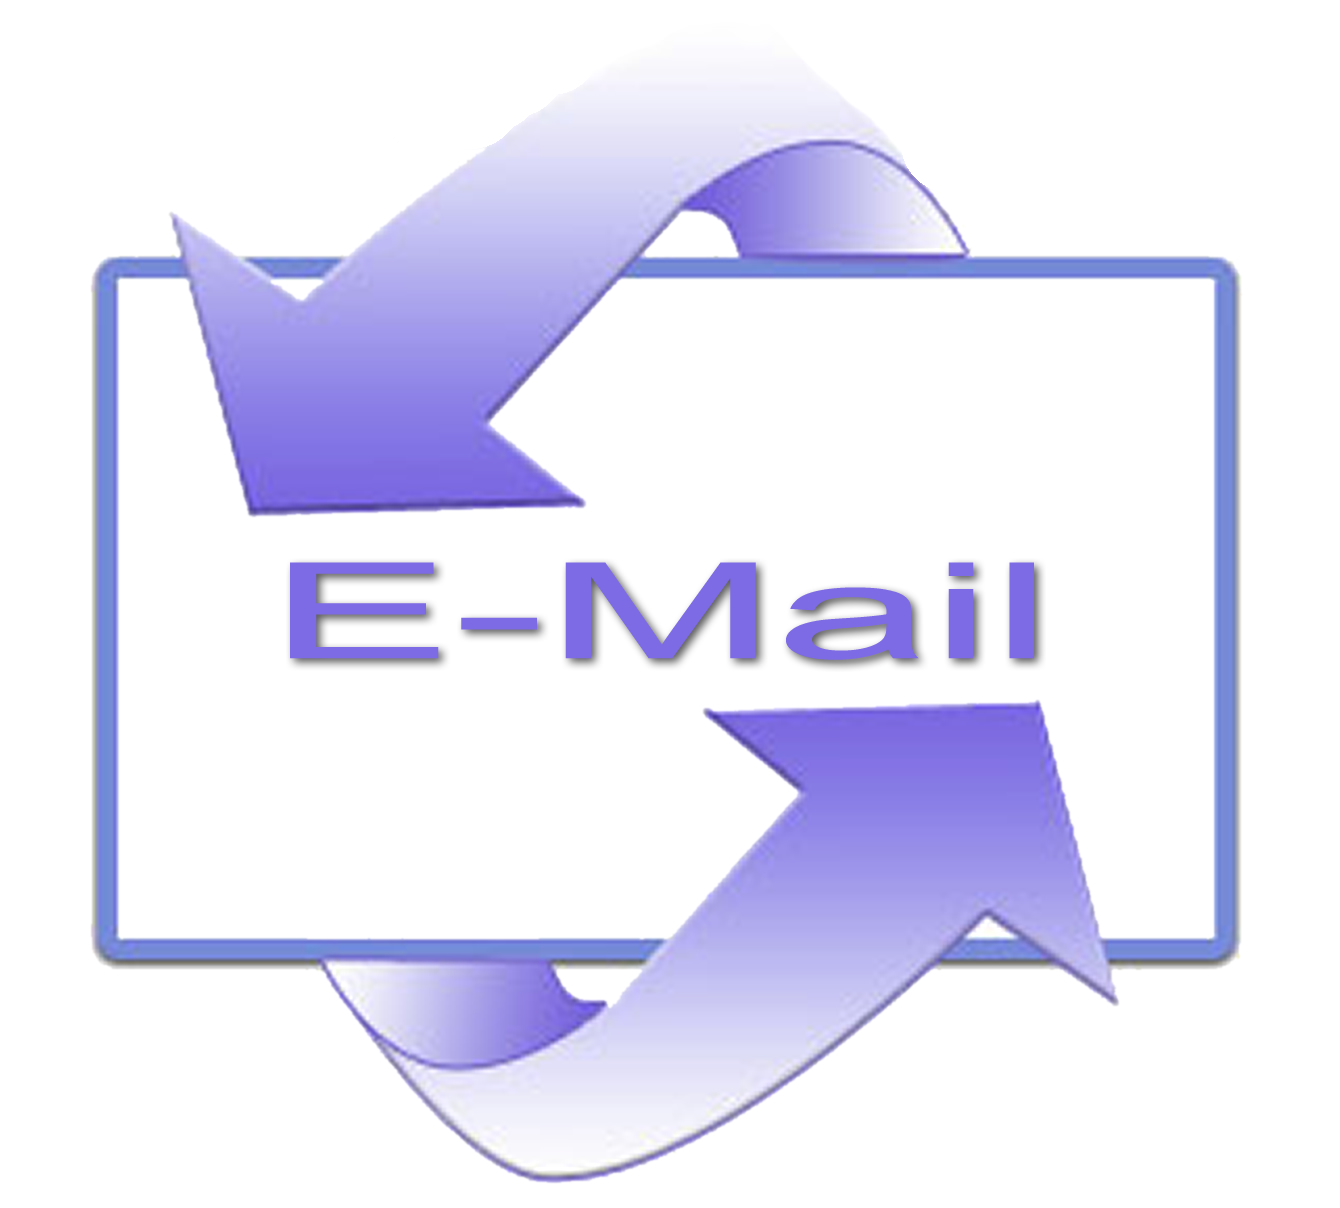 email logo clipart - photo #49